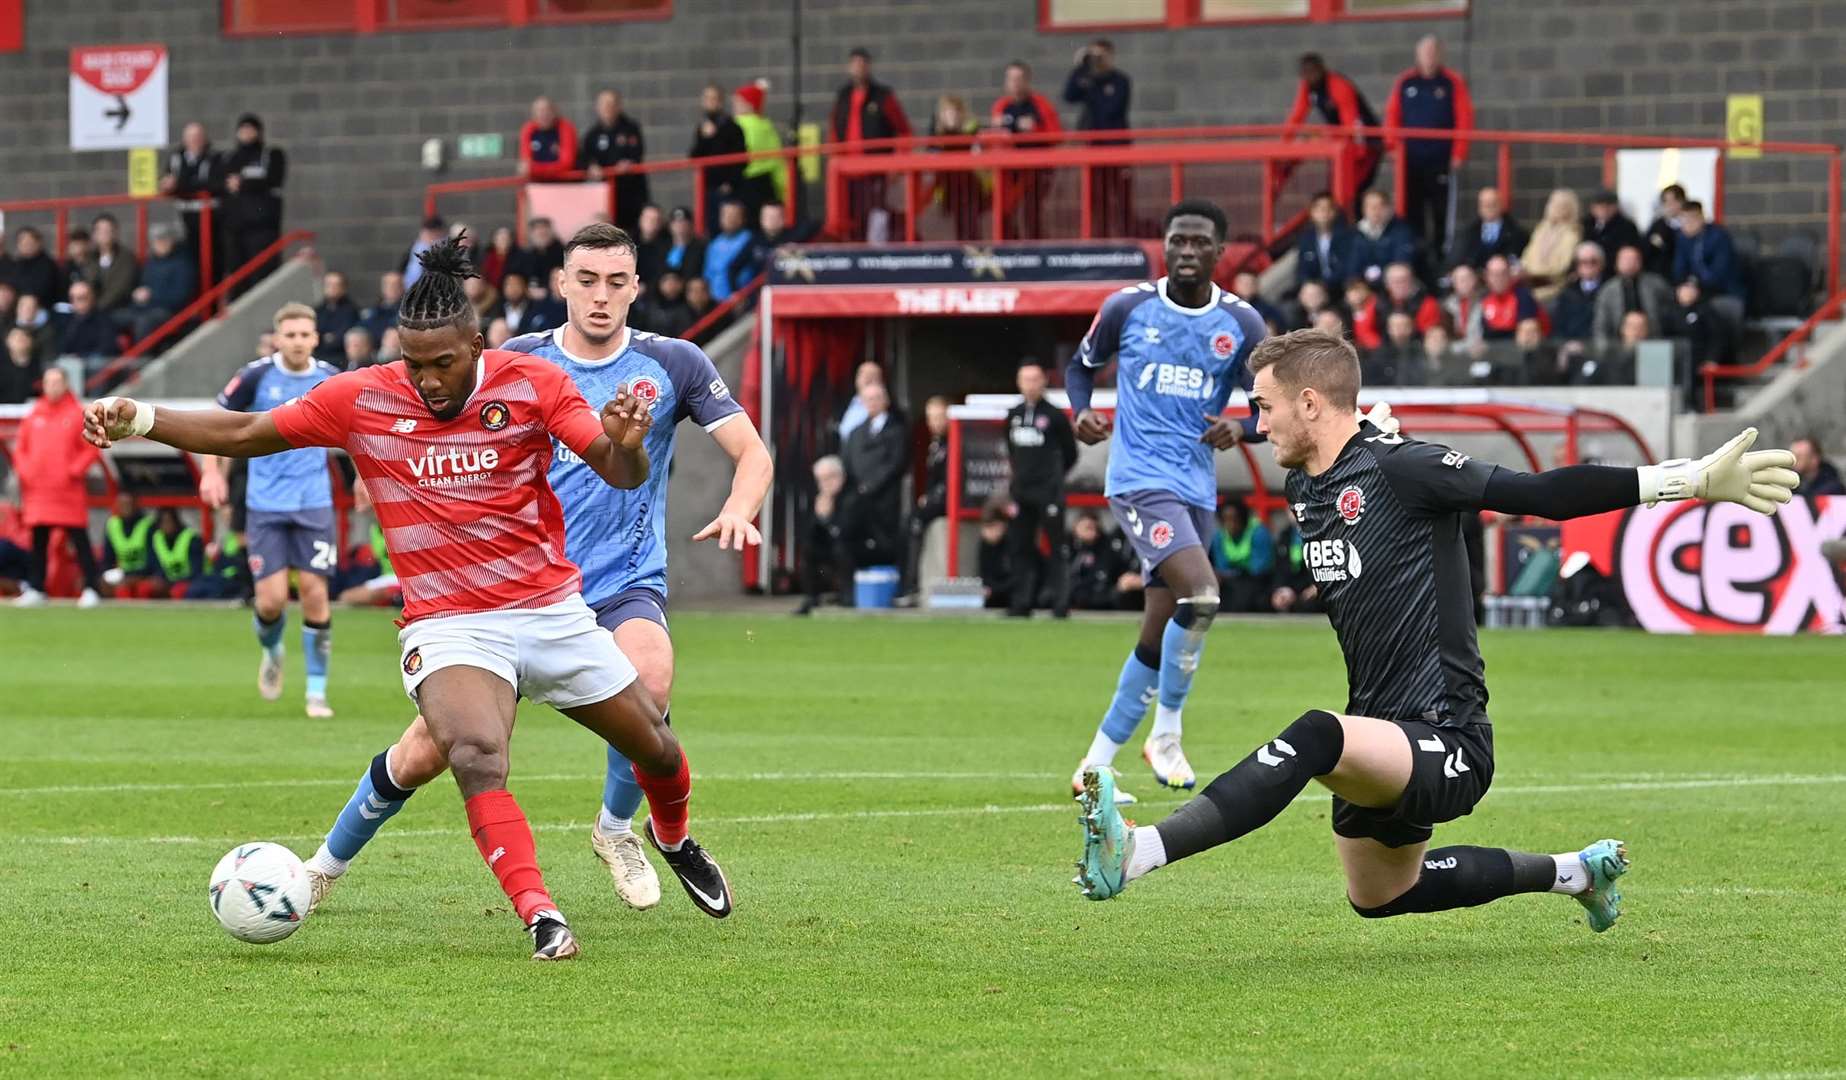 Ebbsfleet striker Dominic Poleon rounds the keeper but shoots wide in the first half. Picture: Keith Gillard